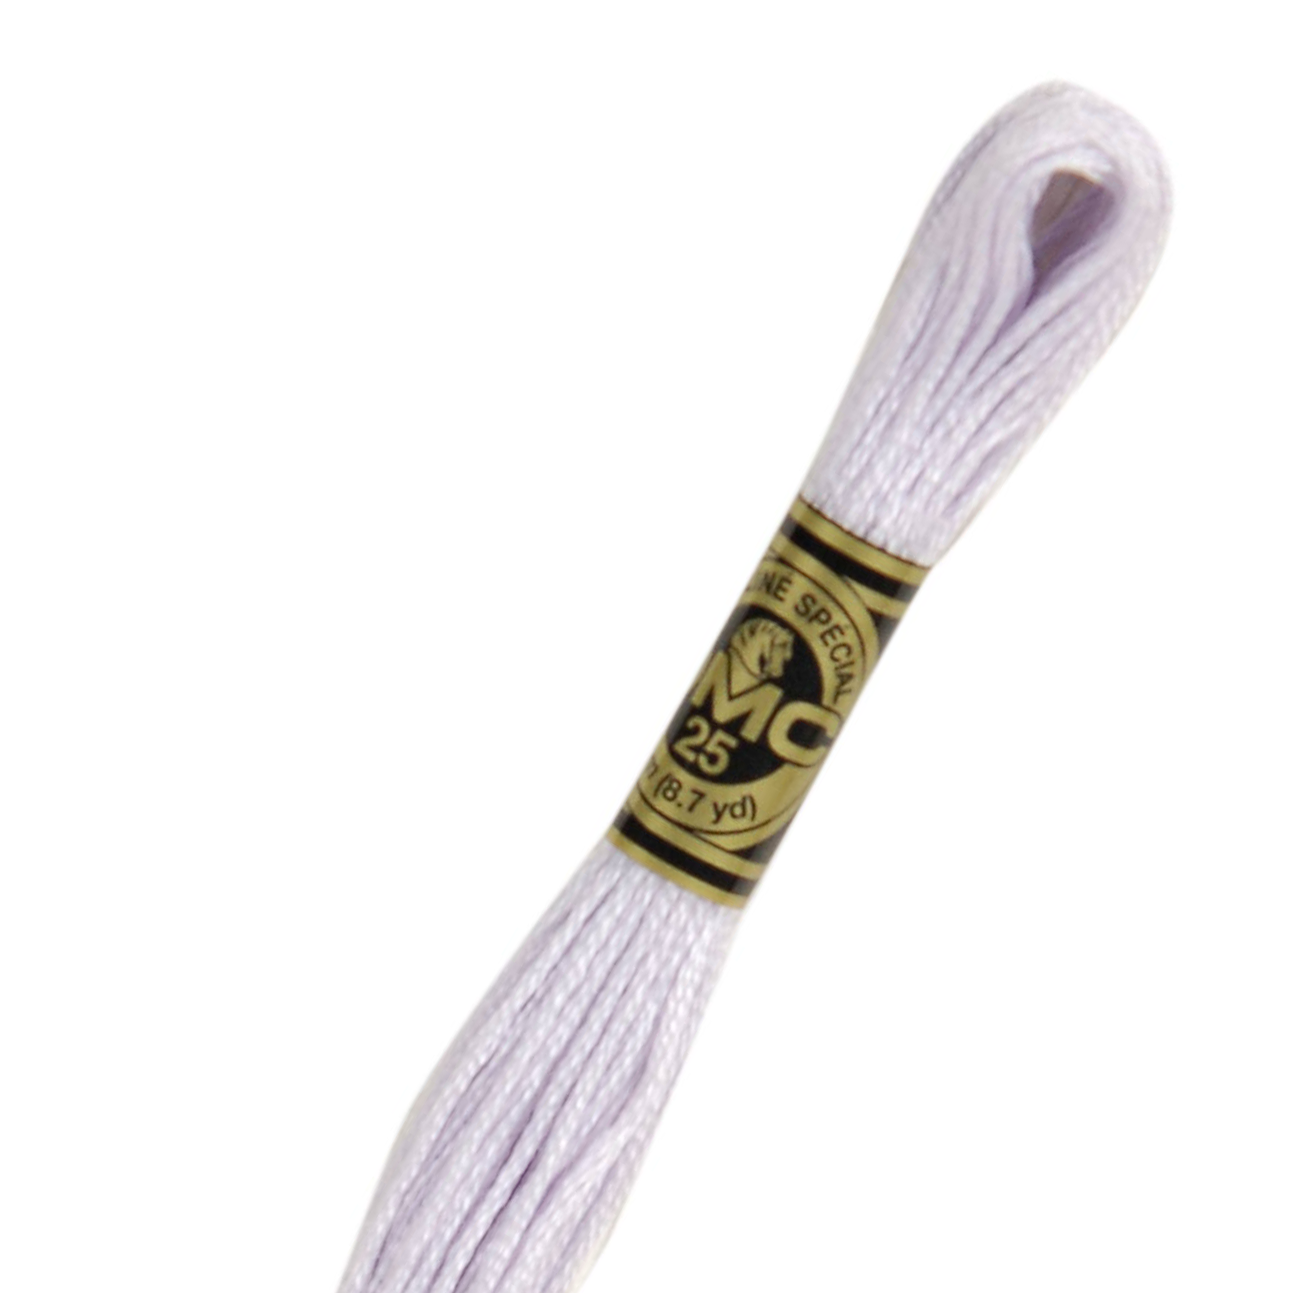 DMC 162 Cotton Embroidery Floss - Stitched Modern